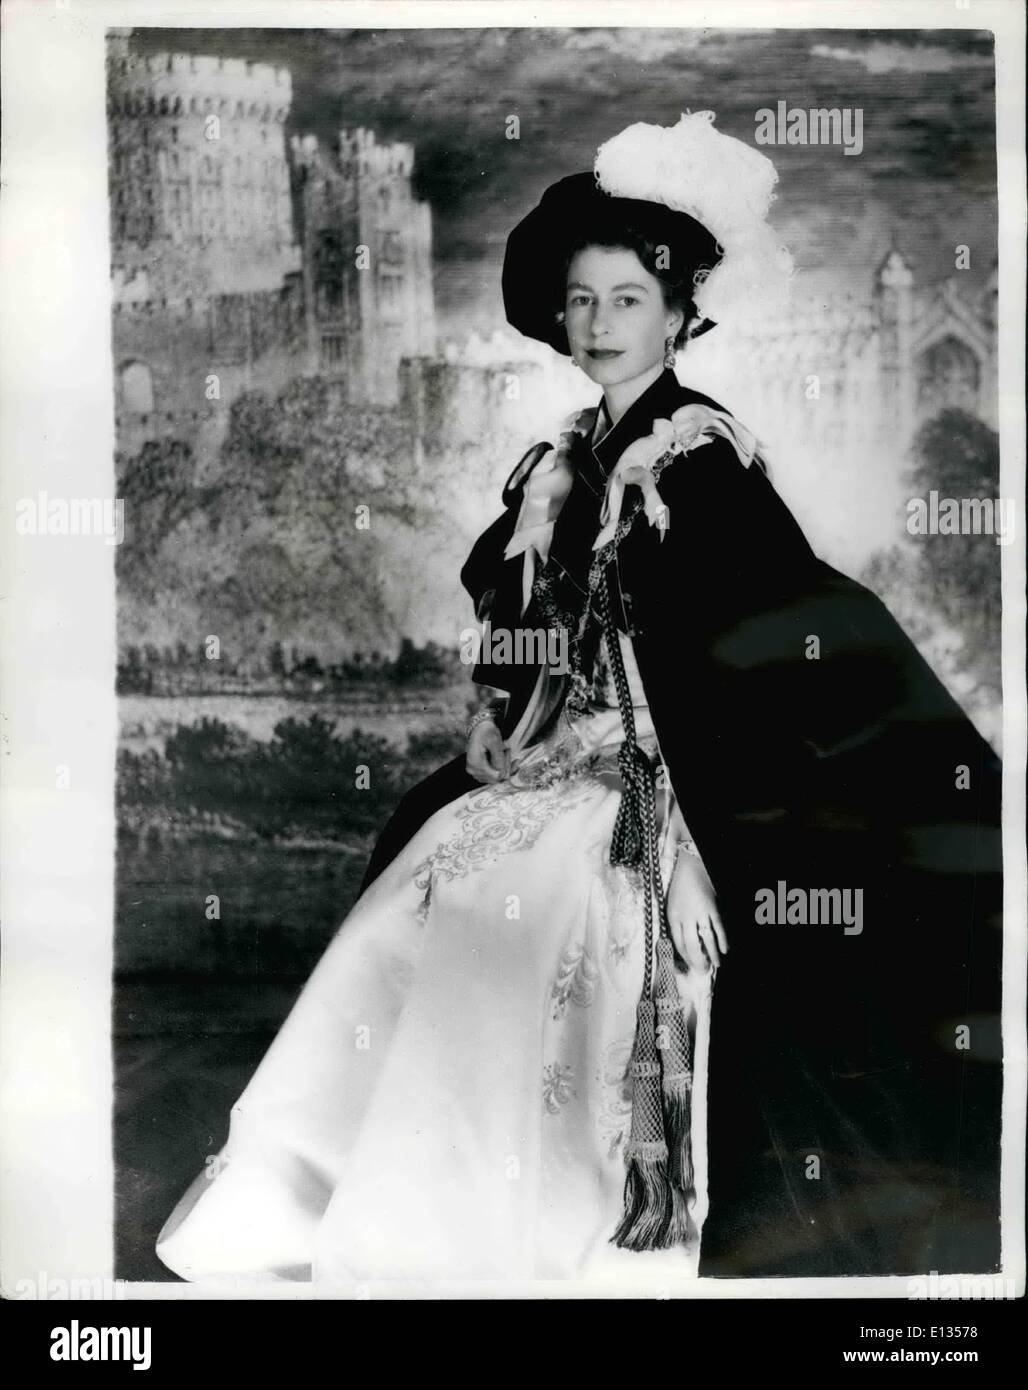 Feb. 28, 2012 - Garter Sovereign; This Photo of Queen Elizabeth was made by Cecil Beaton at Buckingham Palace especially in connection with the Garter Ceremony to be held at St. George Chapel, Windsor Castle June 18. At the Ceremony, Sir Anthony Eden, Earl Attlee and the Earl of Iveach are to be invested. This will bring the membership of Britain's most exalted Oder of Chivalry to 25 and no one else can be accepted until the Death of one of the present holders. the Queen is shown in habit and ensigns of the order, of which she is sovereign Stock Photo